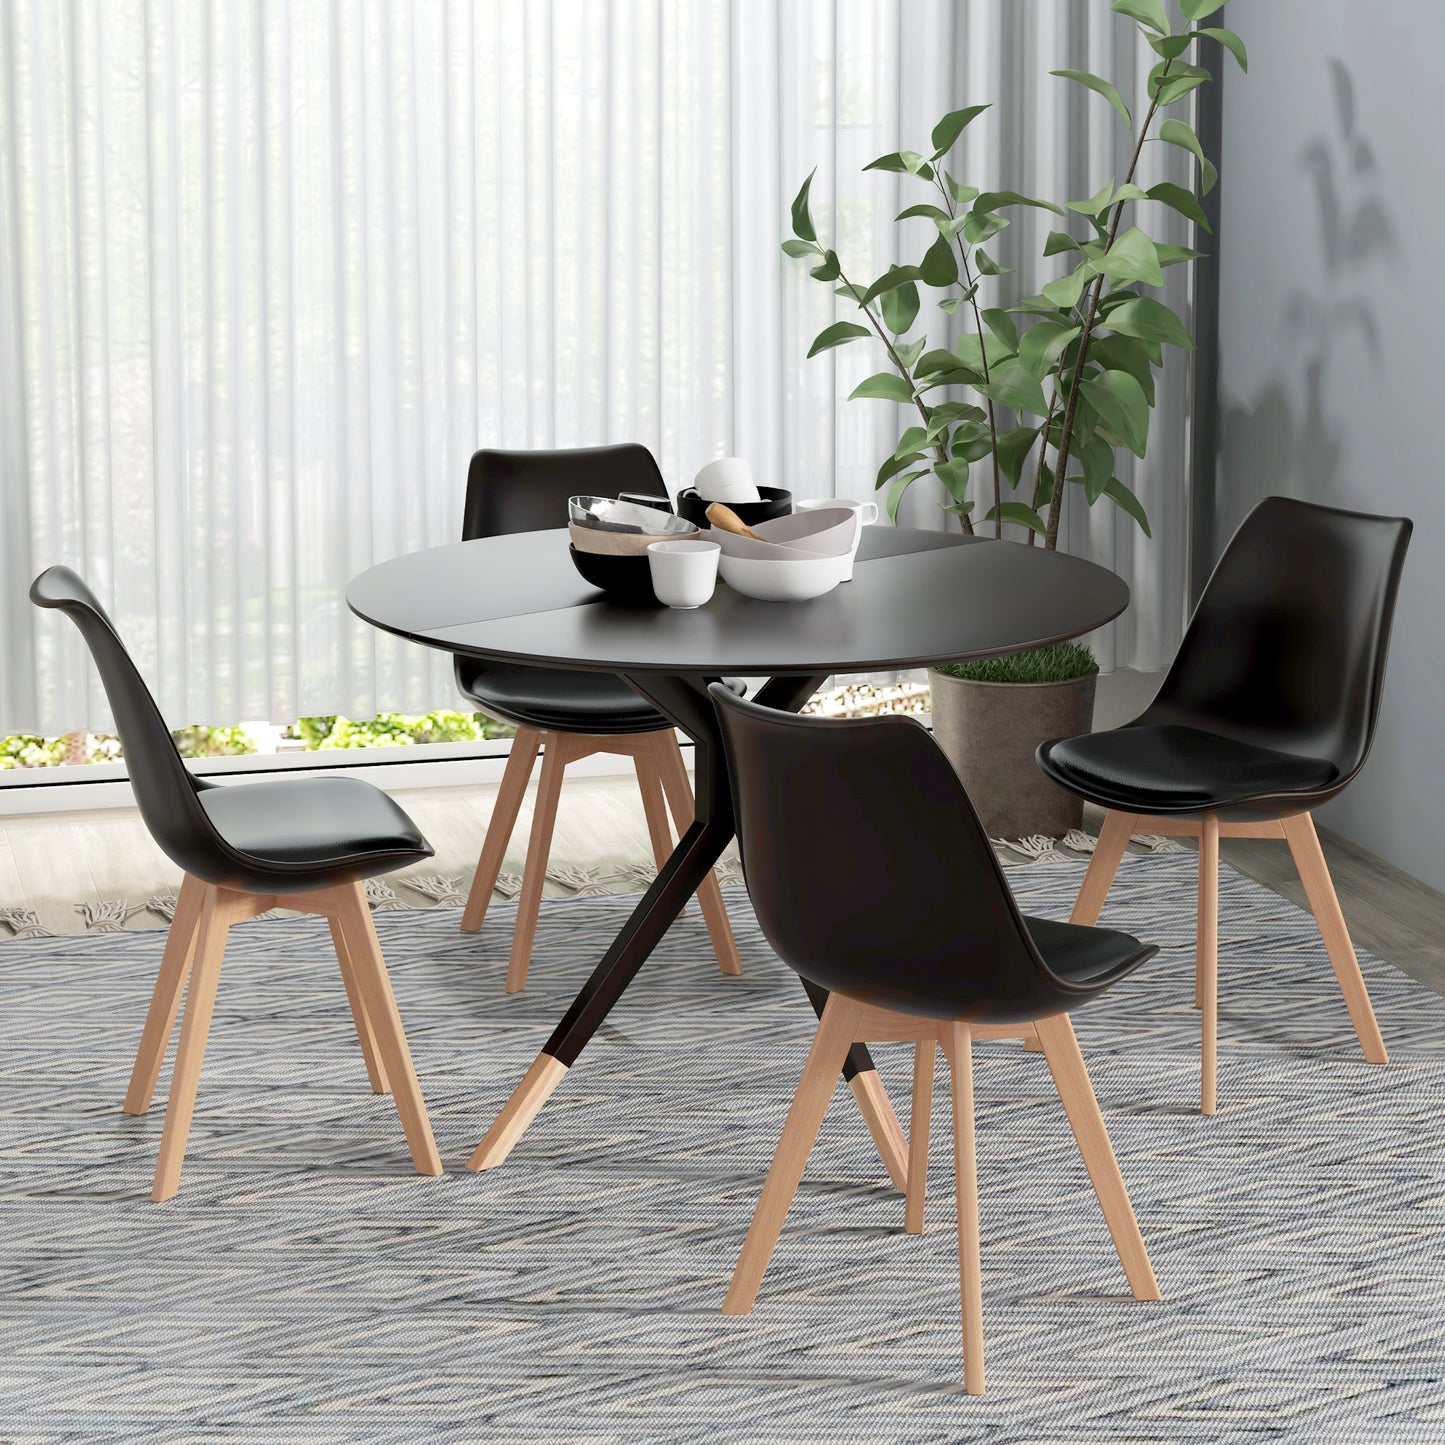 Modern Dining Table Chairs Set of 4, Rubber Wood Kitchen Table Chairs with PU Leather Cushion for Living Room, Bedroom - Gallery Canada